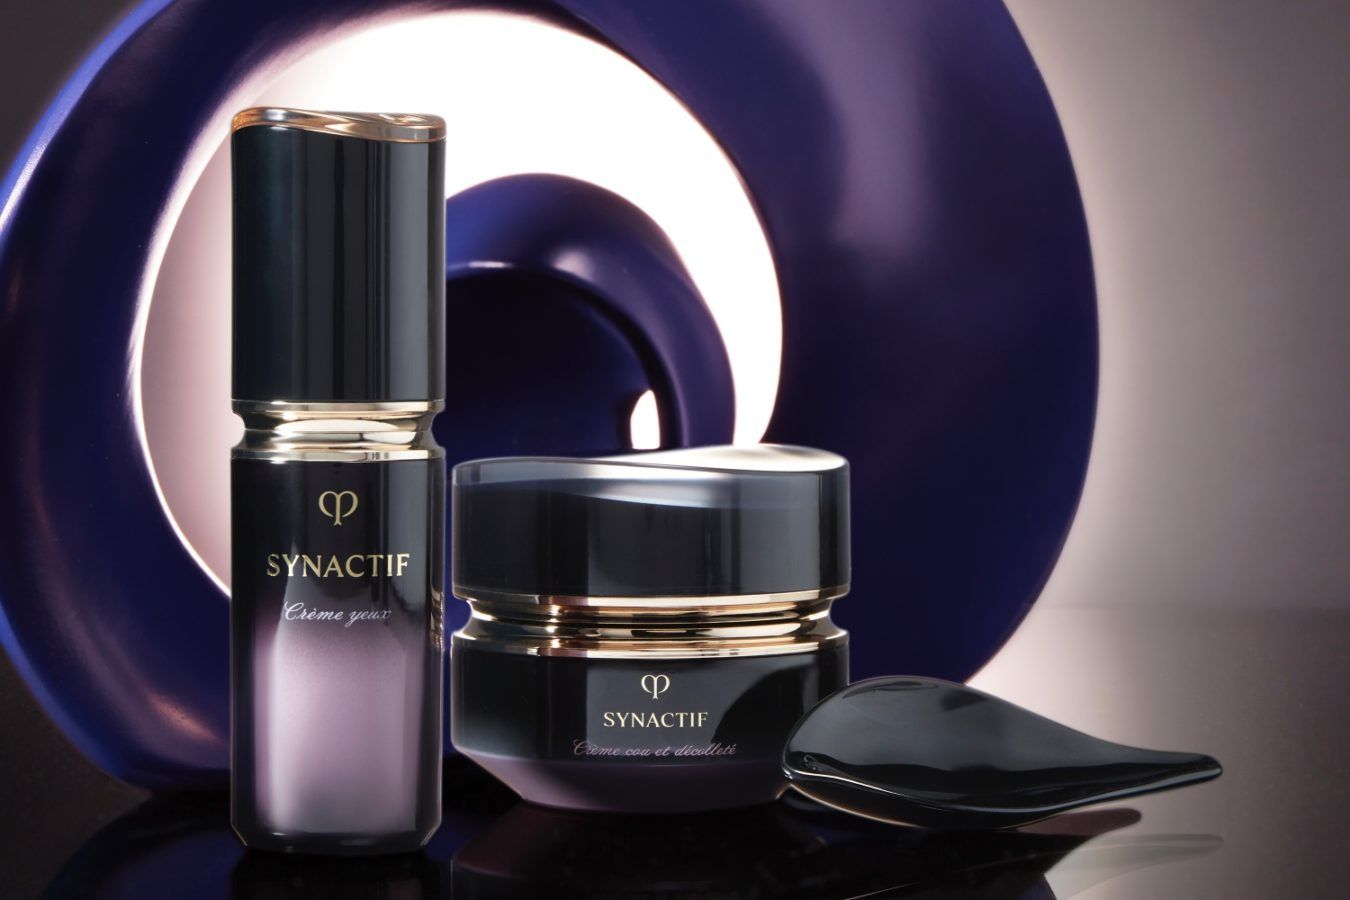 New Year New Skincare Routine Using Cle de Peau’s Synactif Range